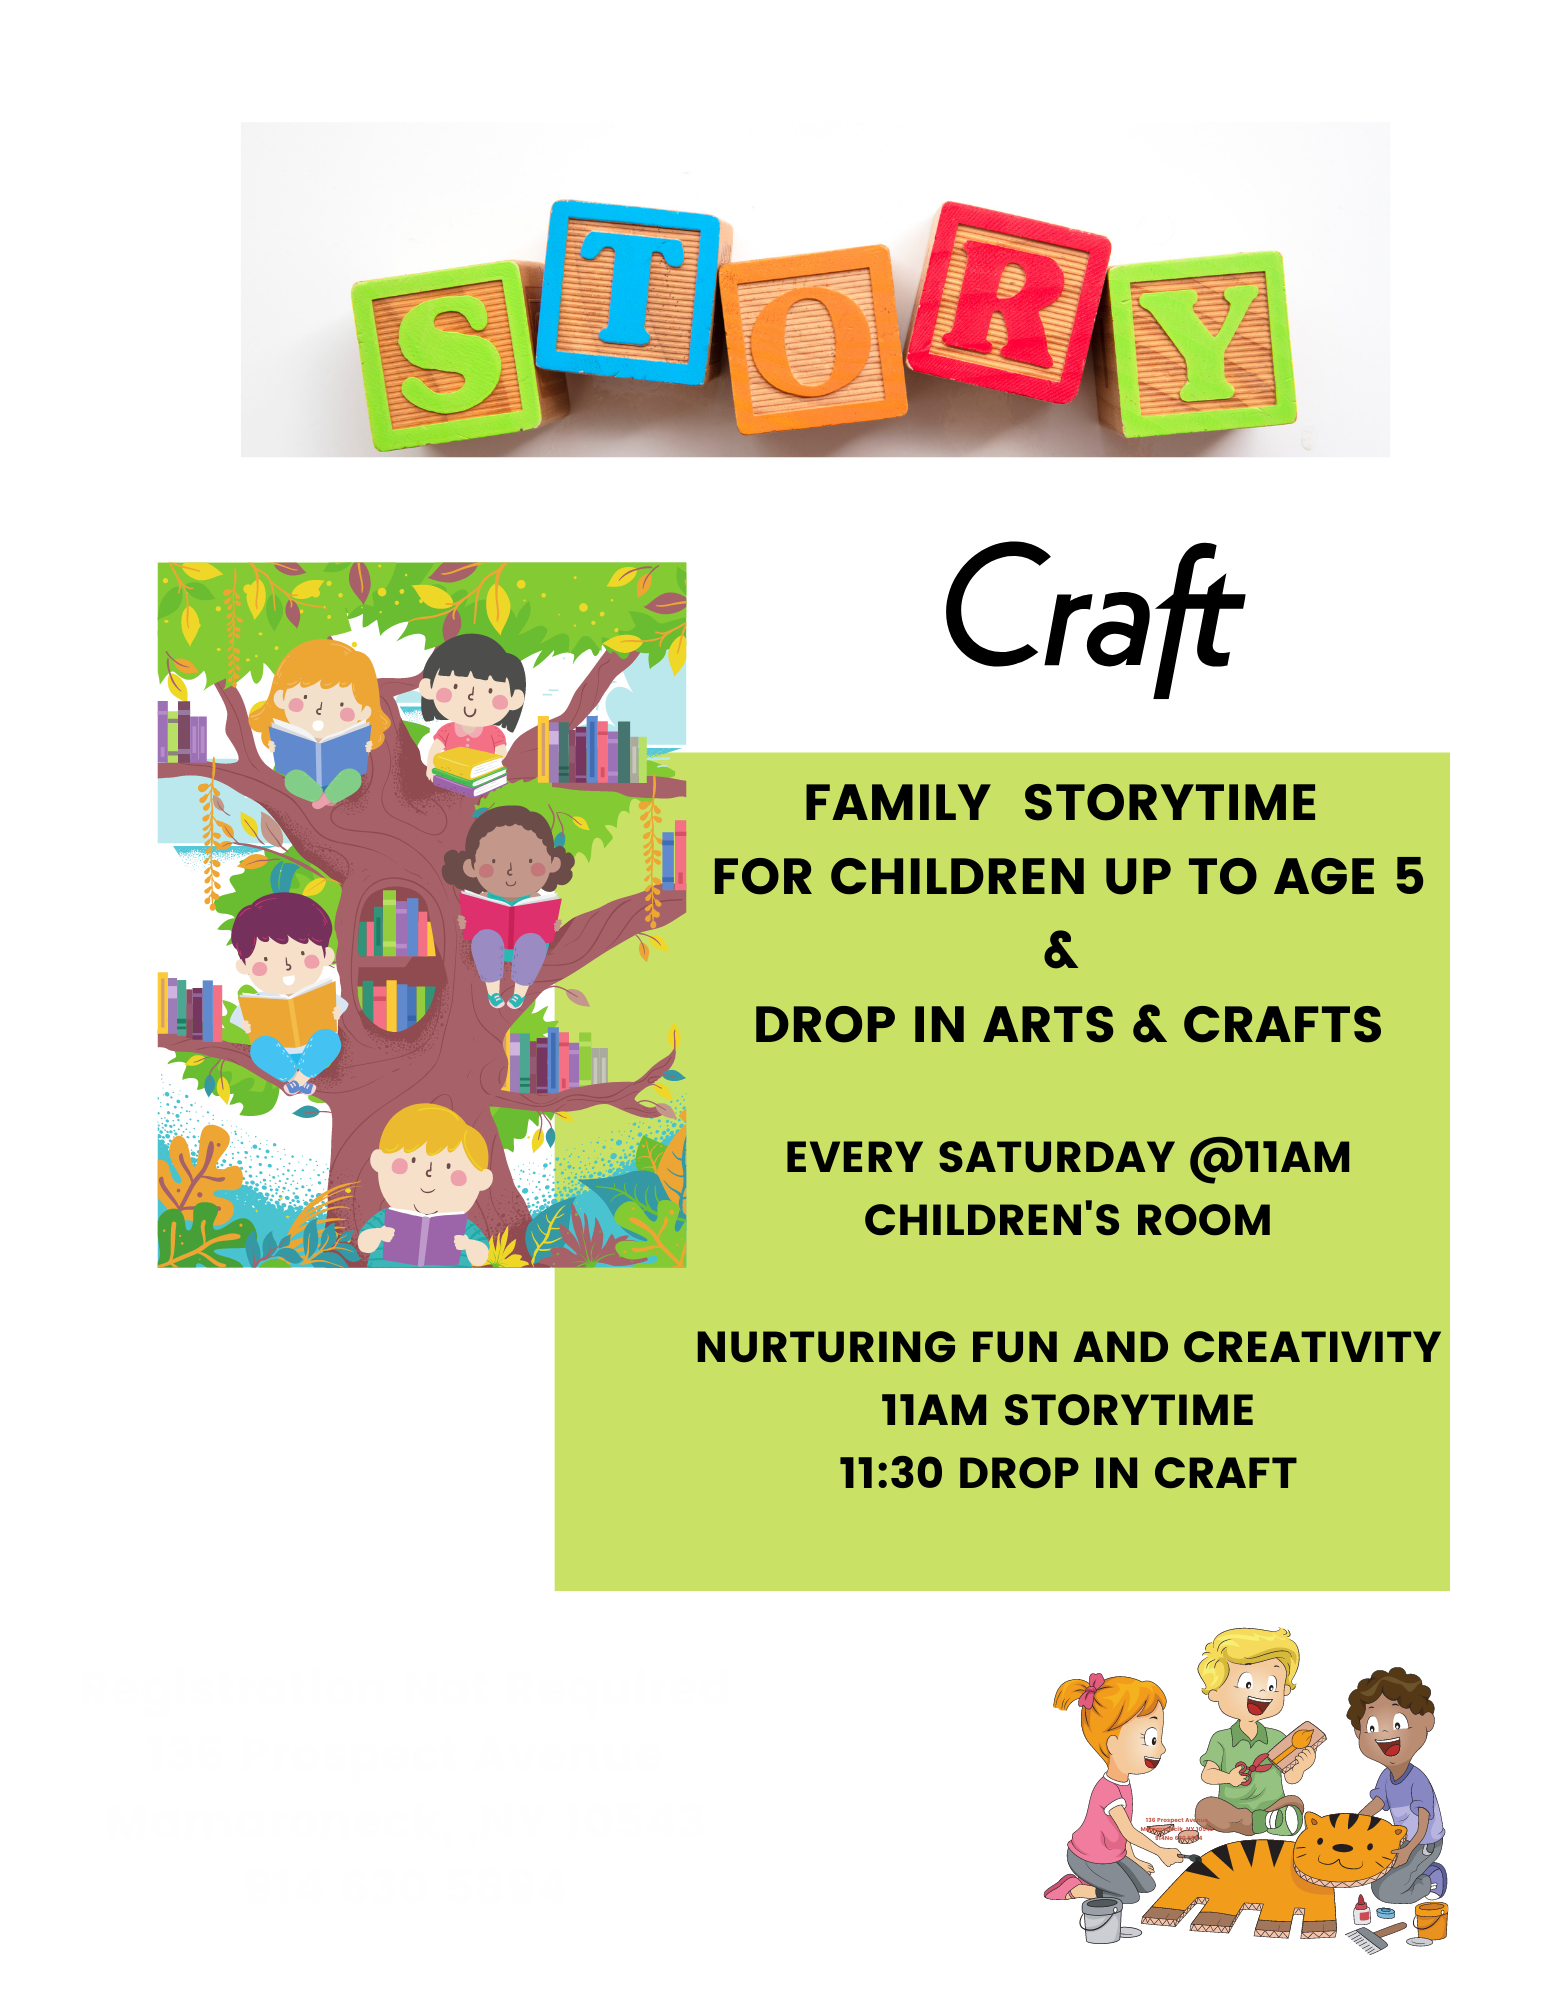 Story and Play on Saturday for families and children